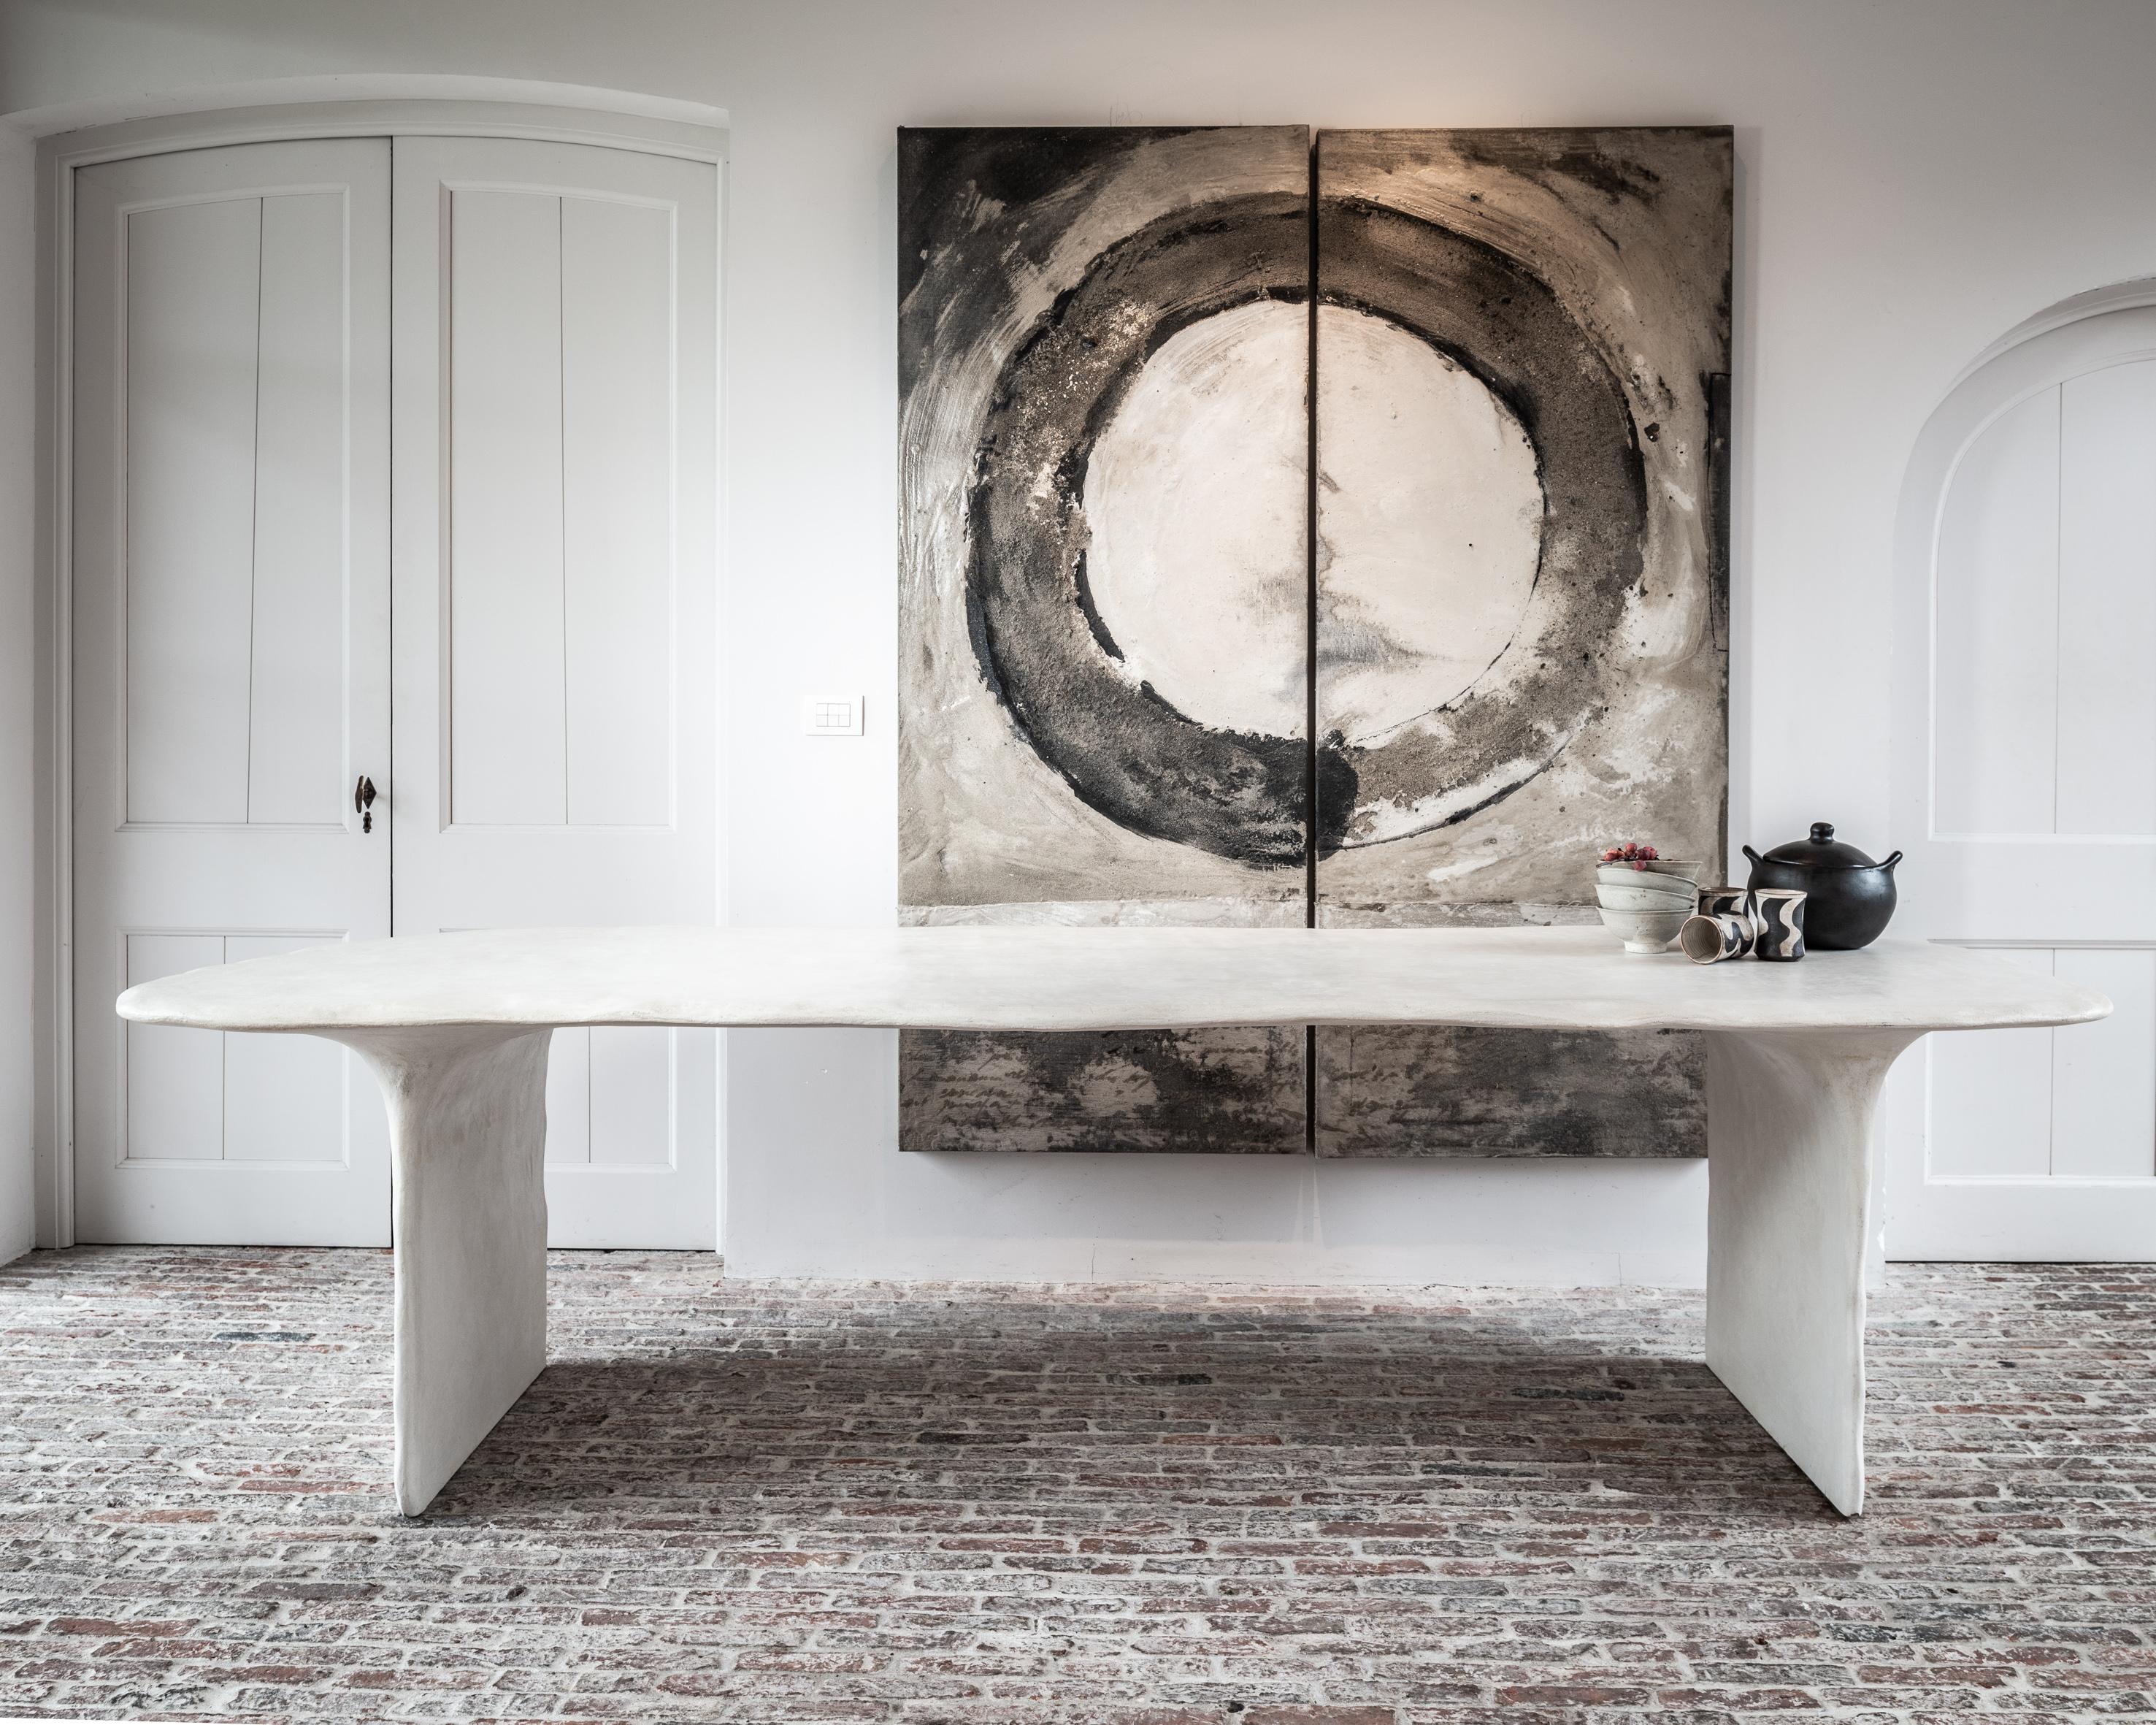 Tremezzo dining table by Studio Emblématique.
Dimensions: W 285 x D 95 x H 76 cm
Materials: Stone grain

Pushing the boundaries, going the extra mile to find the extraordinary piece that defines the space. Embracing craftsmanship and